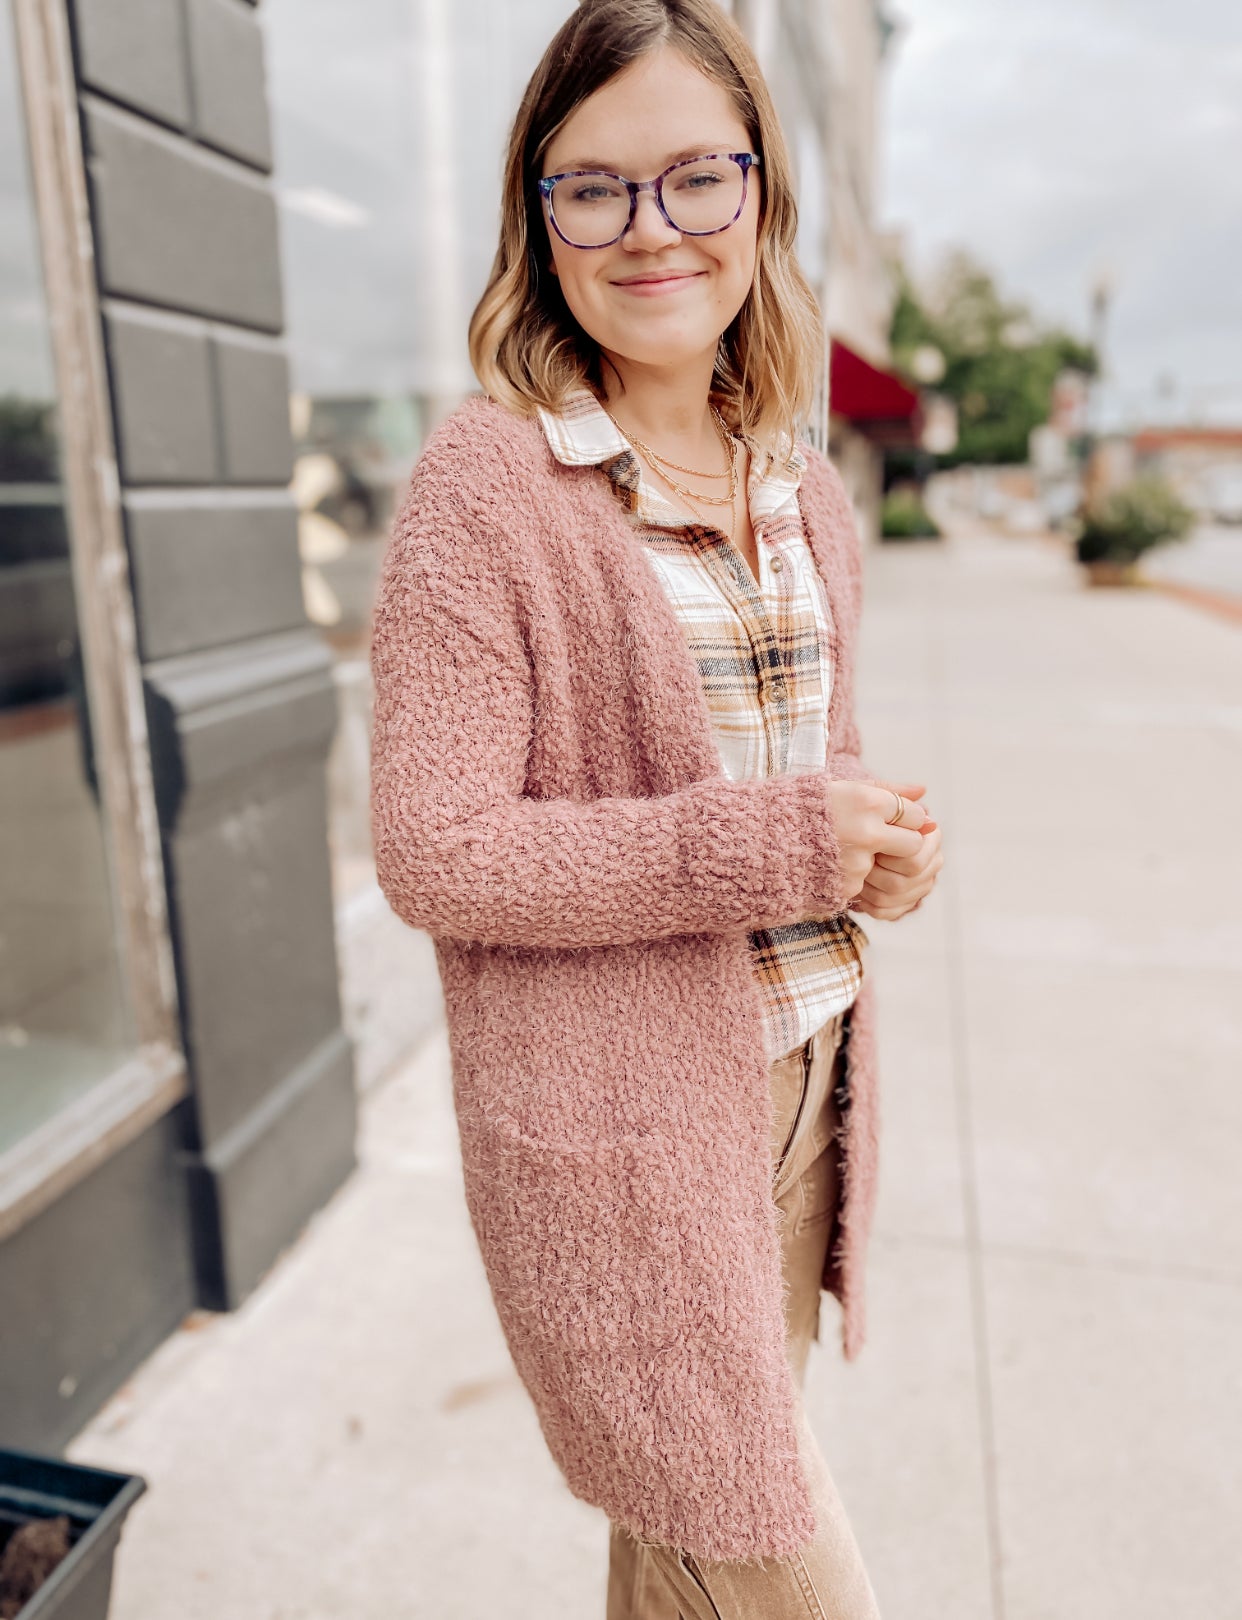 All About You Mauve Popcorn Sweater